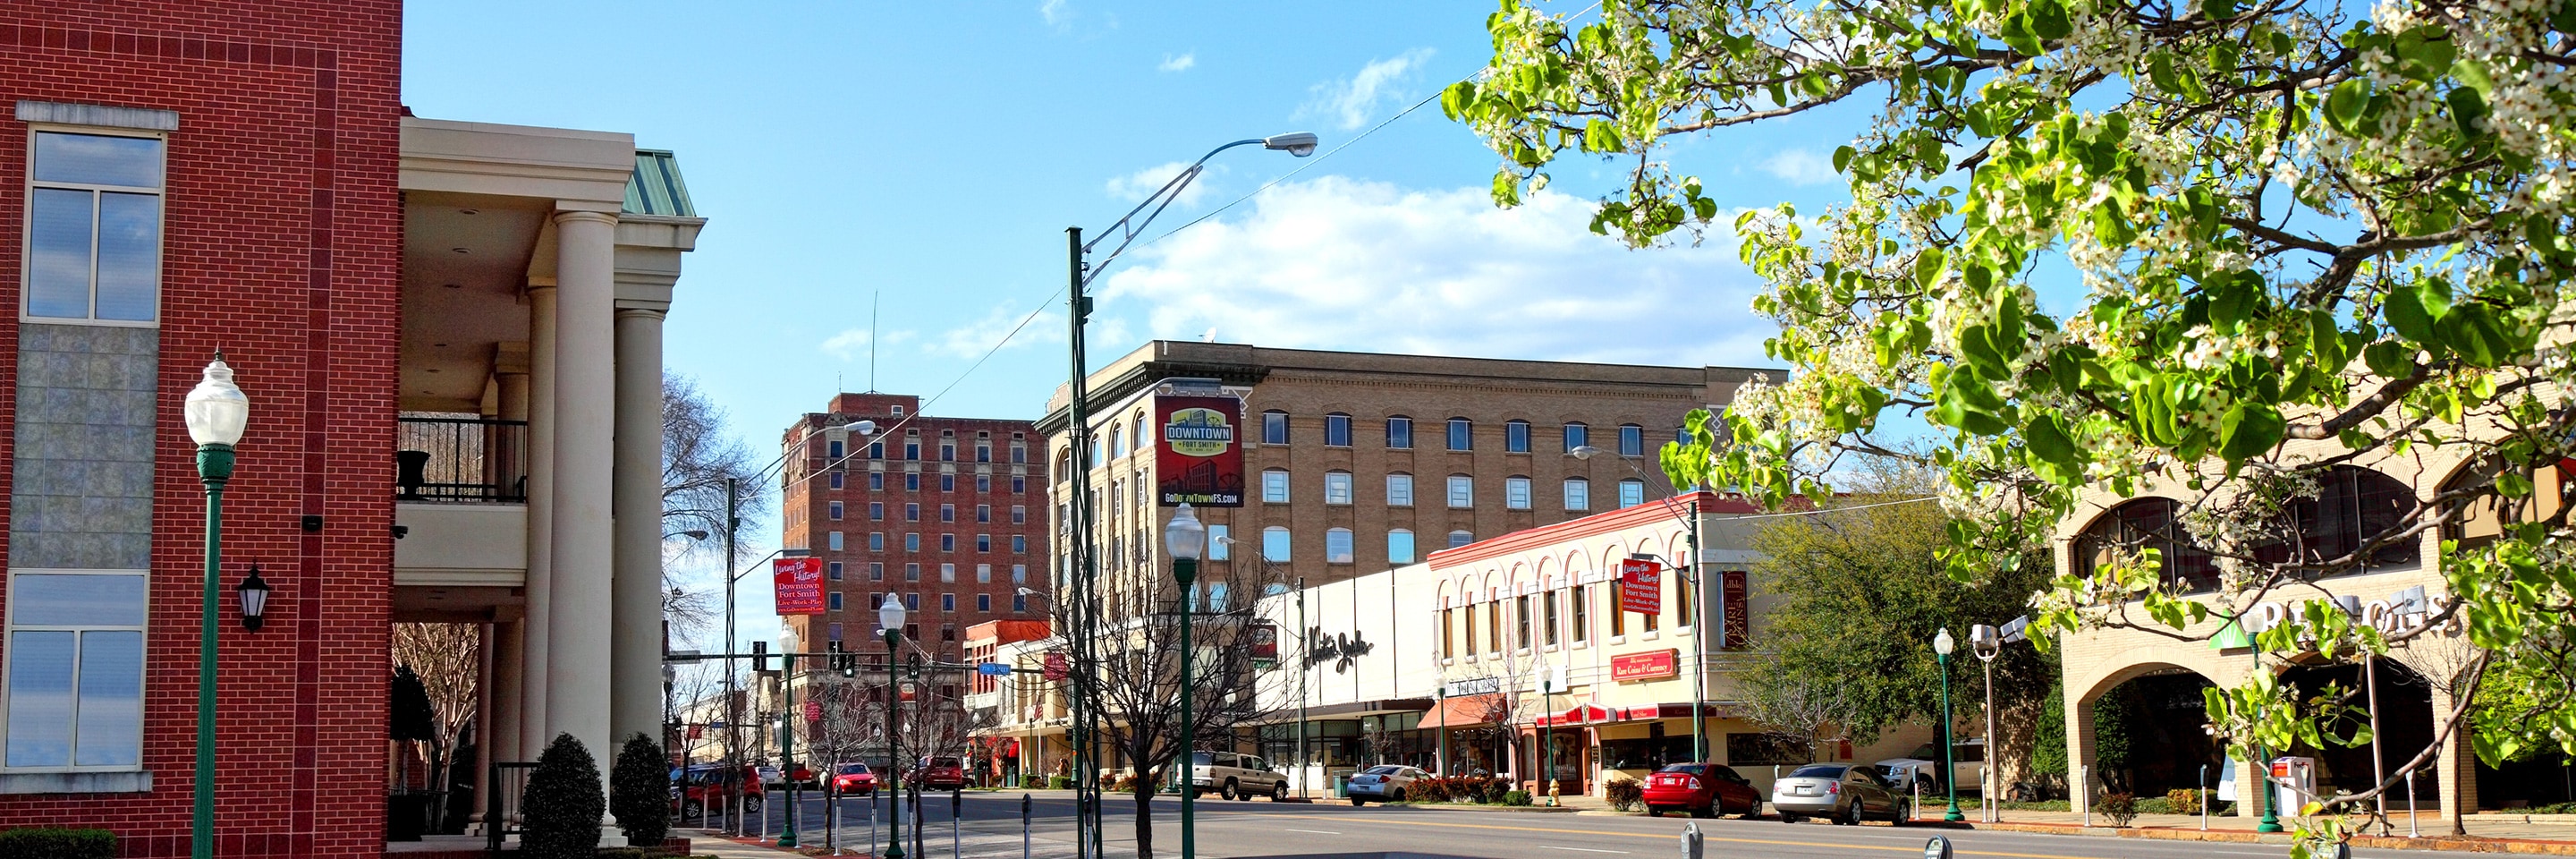 Hotels in Fort Smith